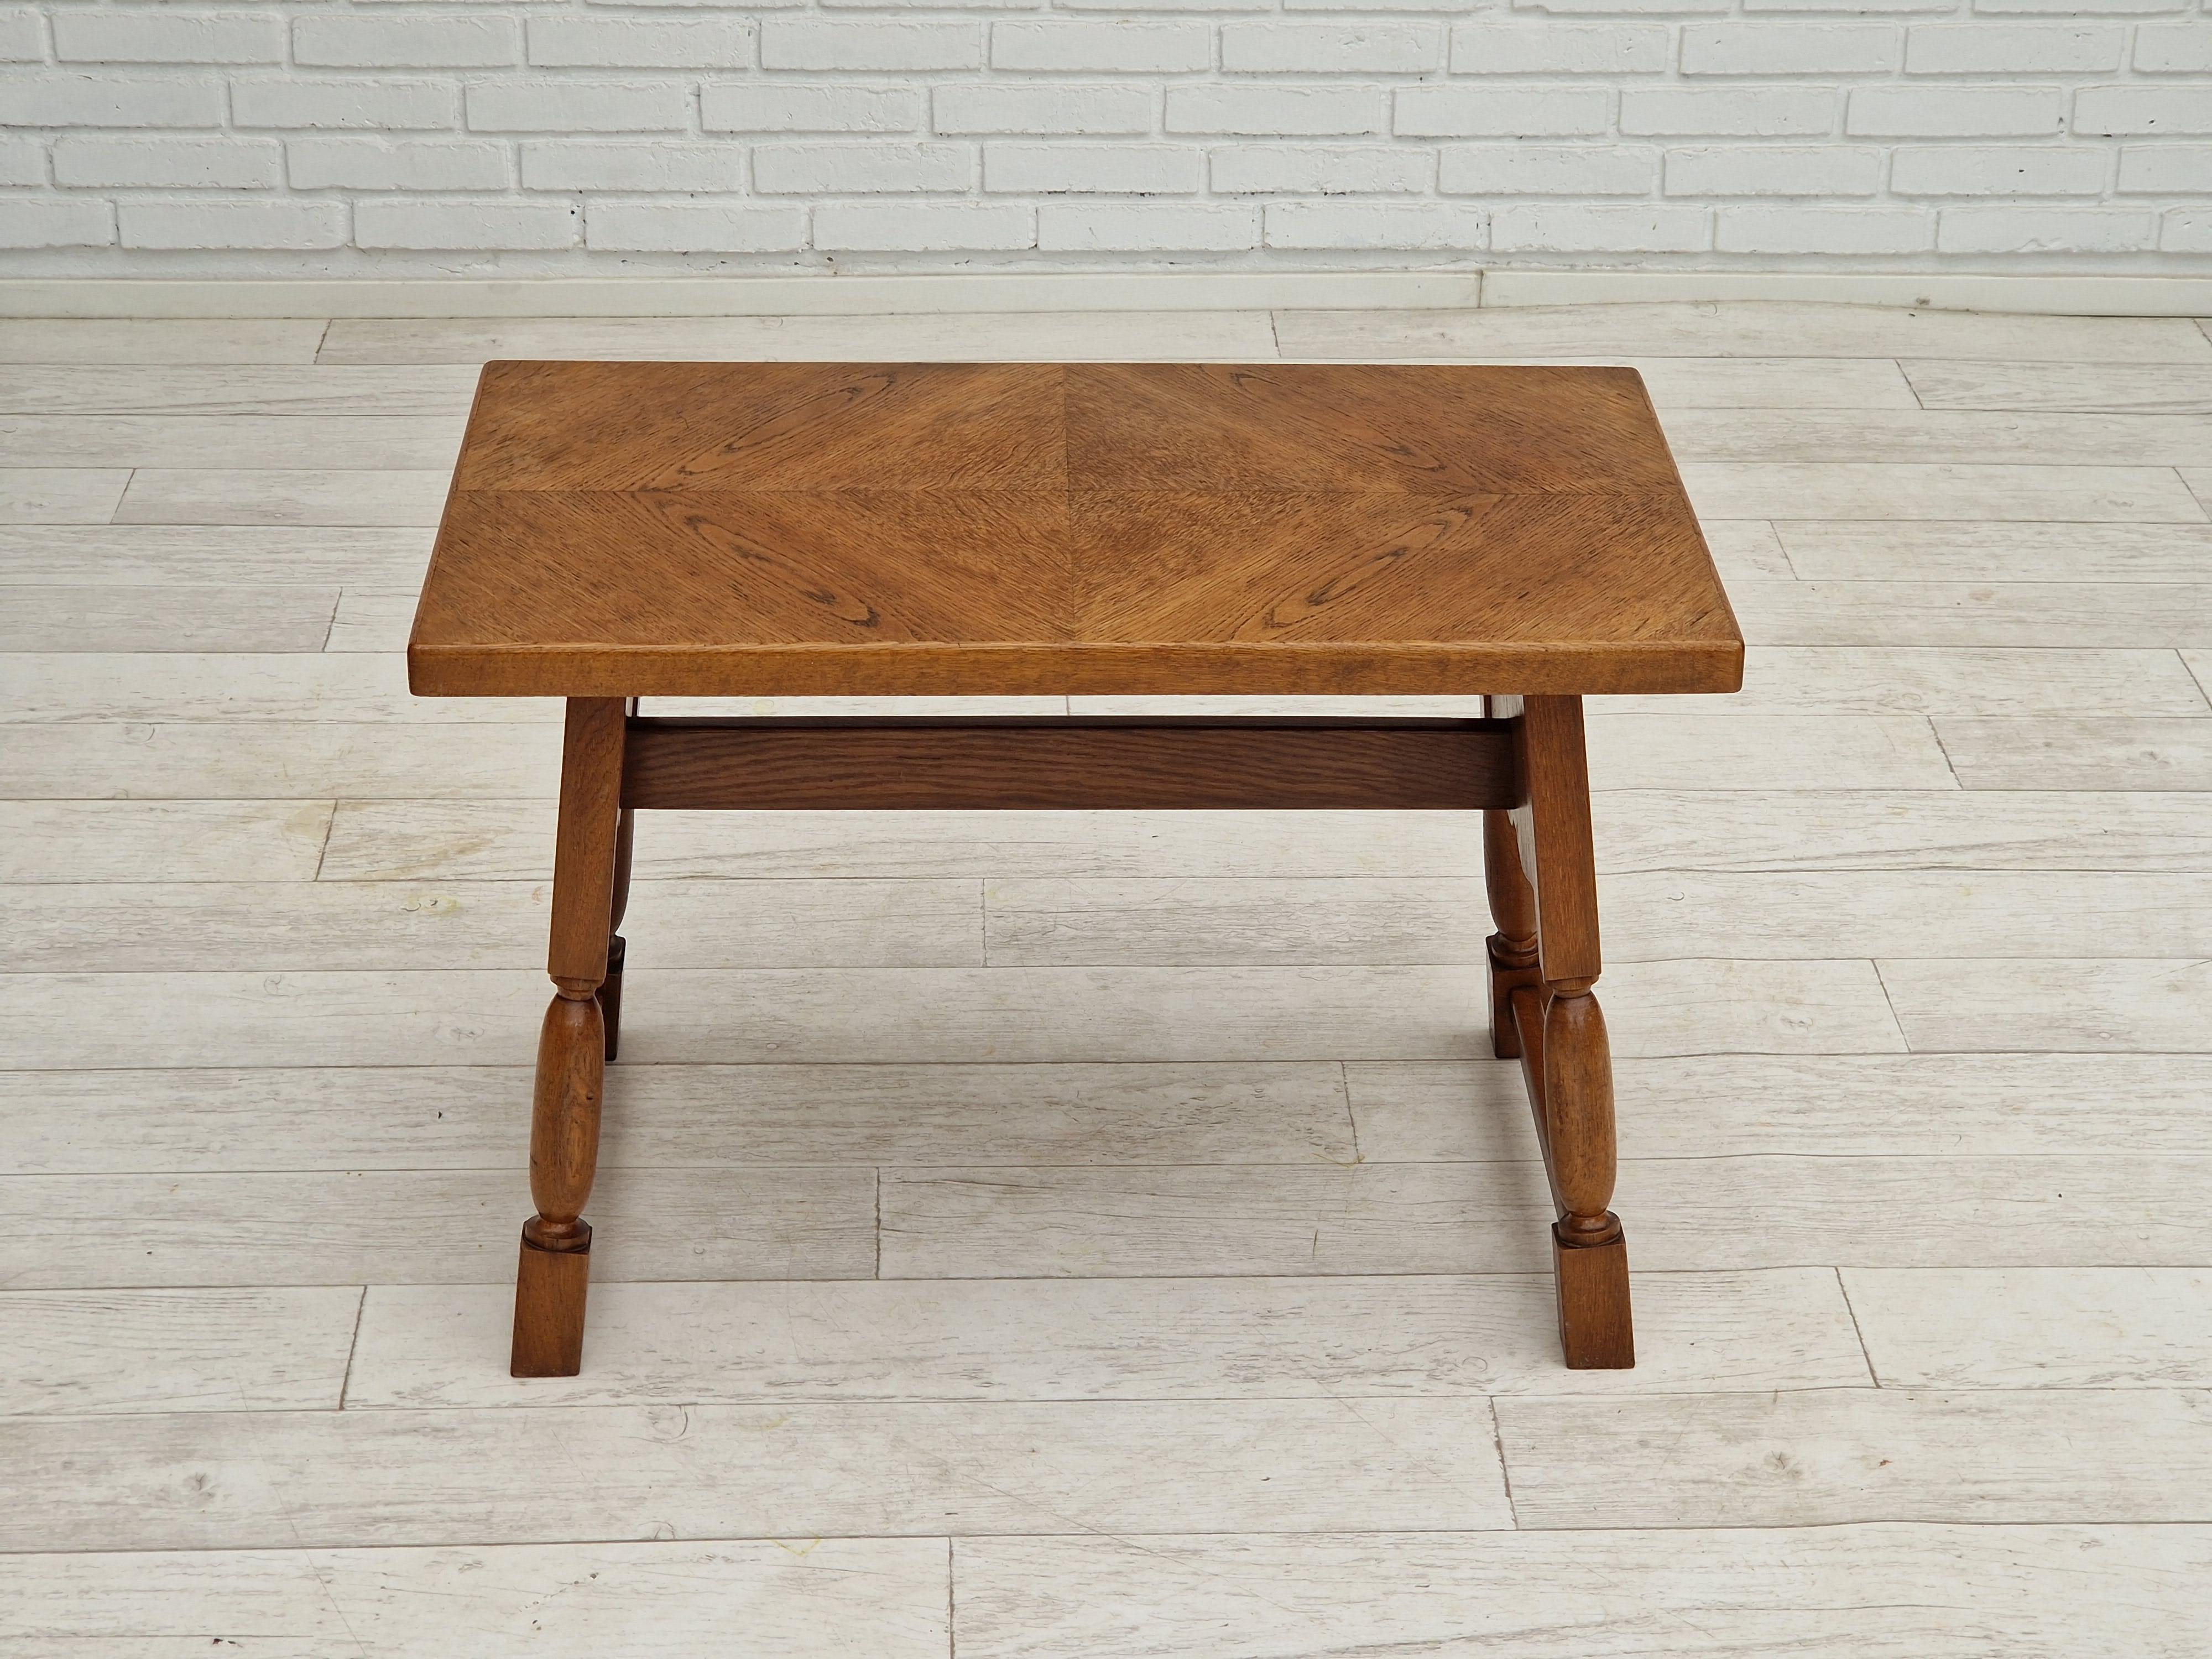 1950s, Danish design. Oak wood coffee table. Original very good condition: no smells and no stains. (Plate thickness 35mm)